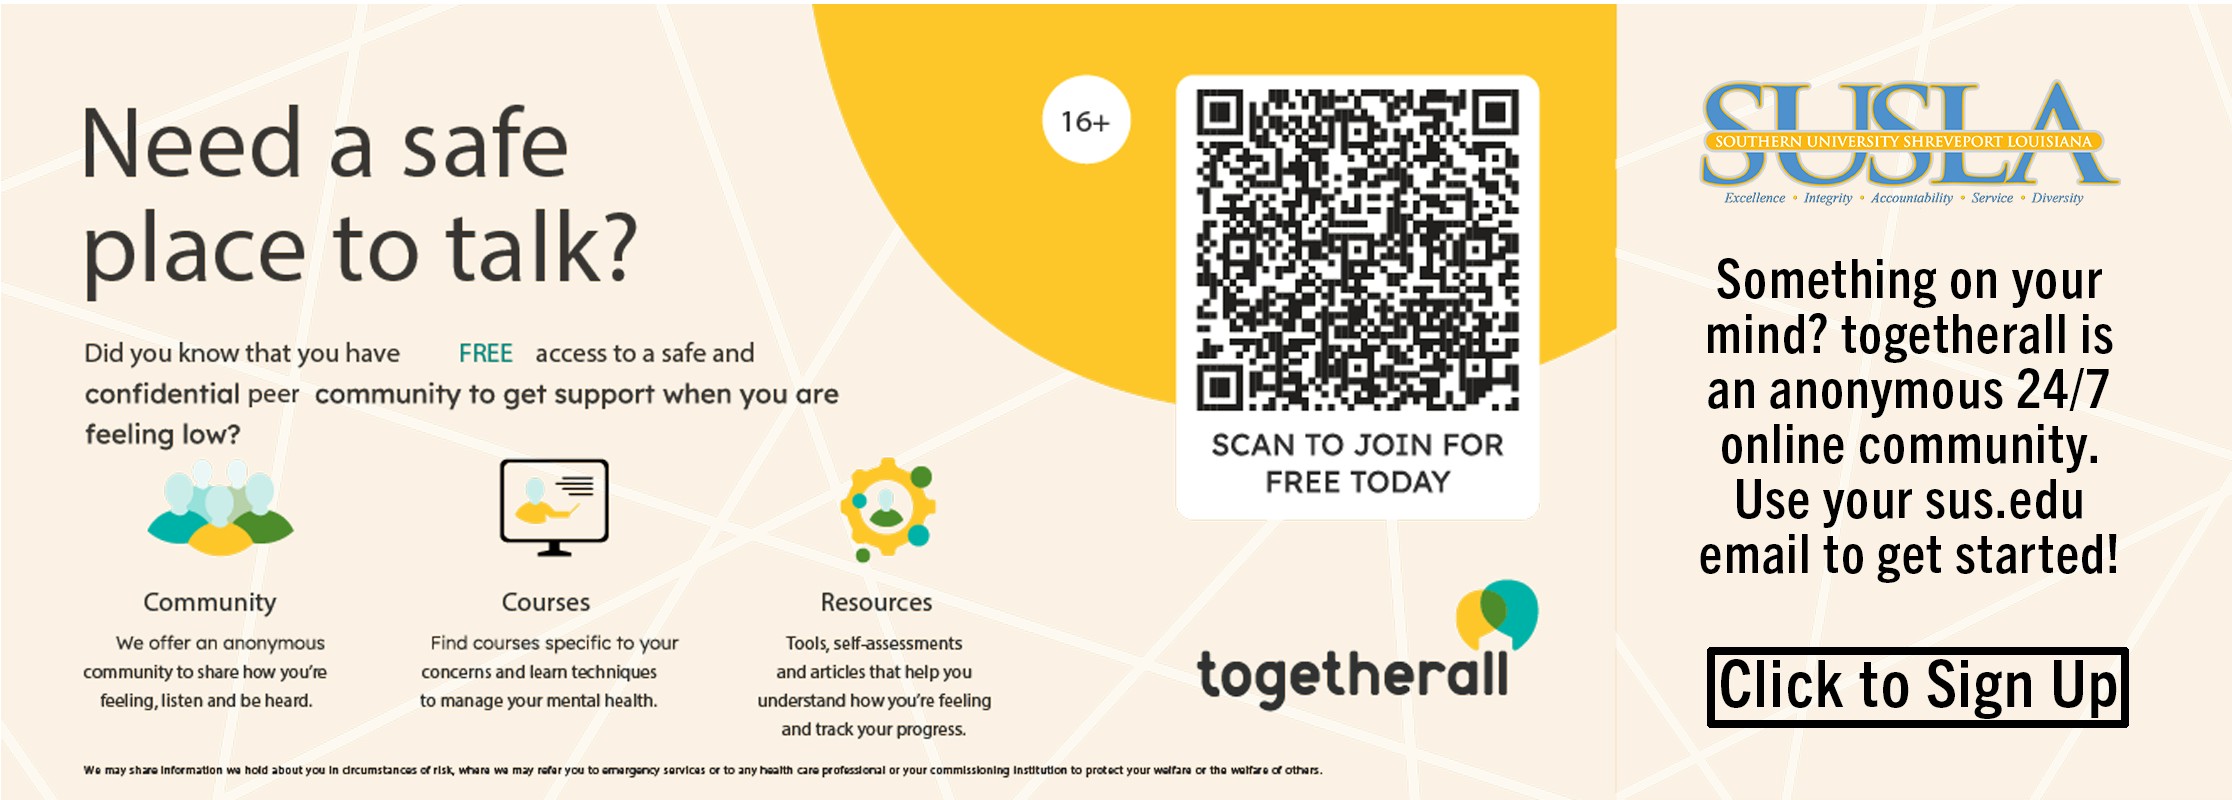 Image with QR Code that allows users to scan to access the togetherall link for counseling